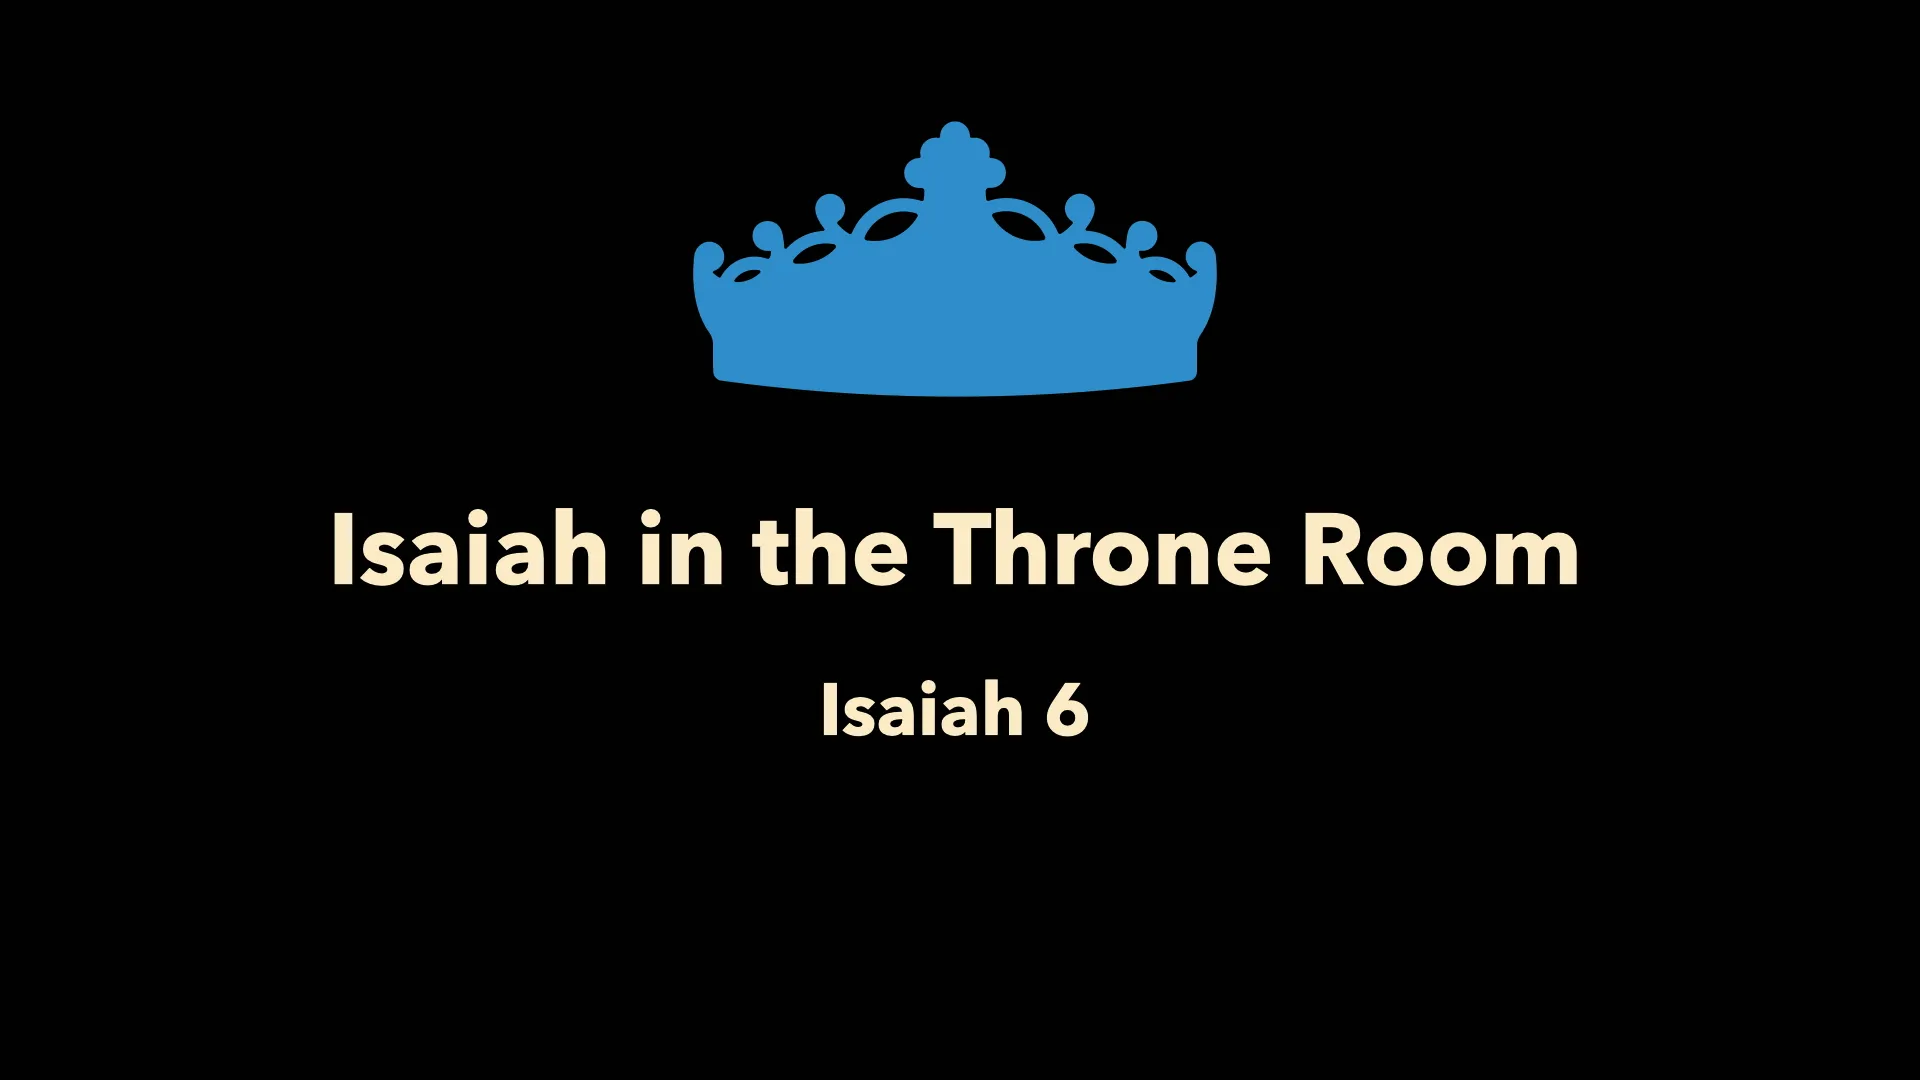 Isaiah in the Throne Room